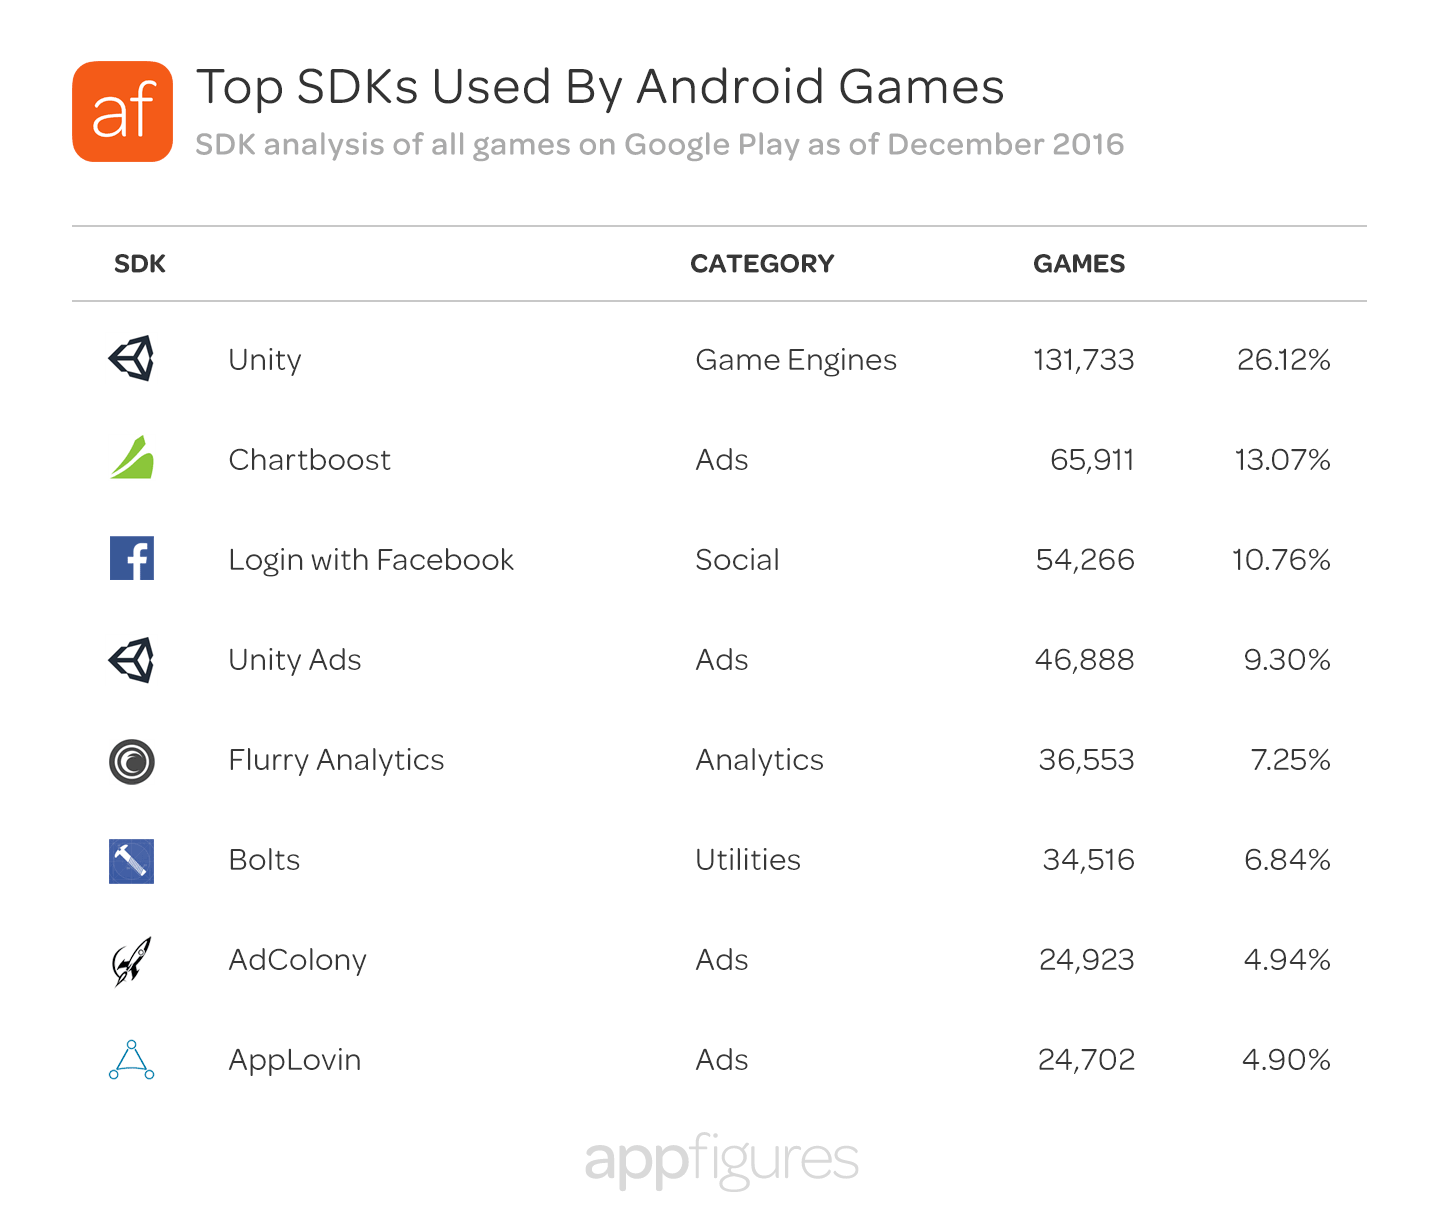 The top 8 mobile SDKs used in all Android games